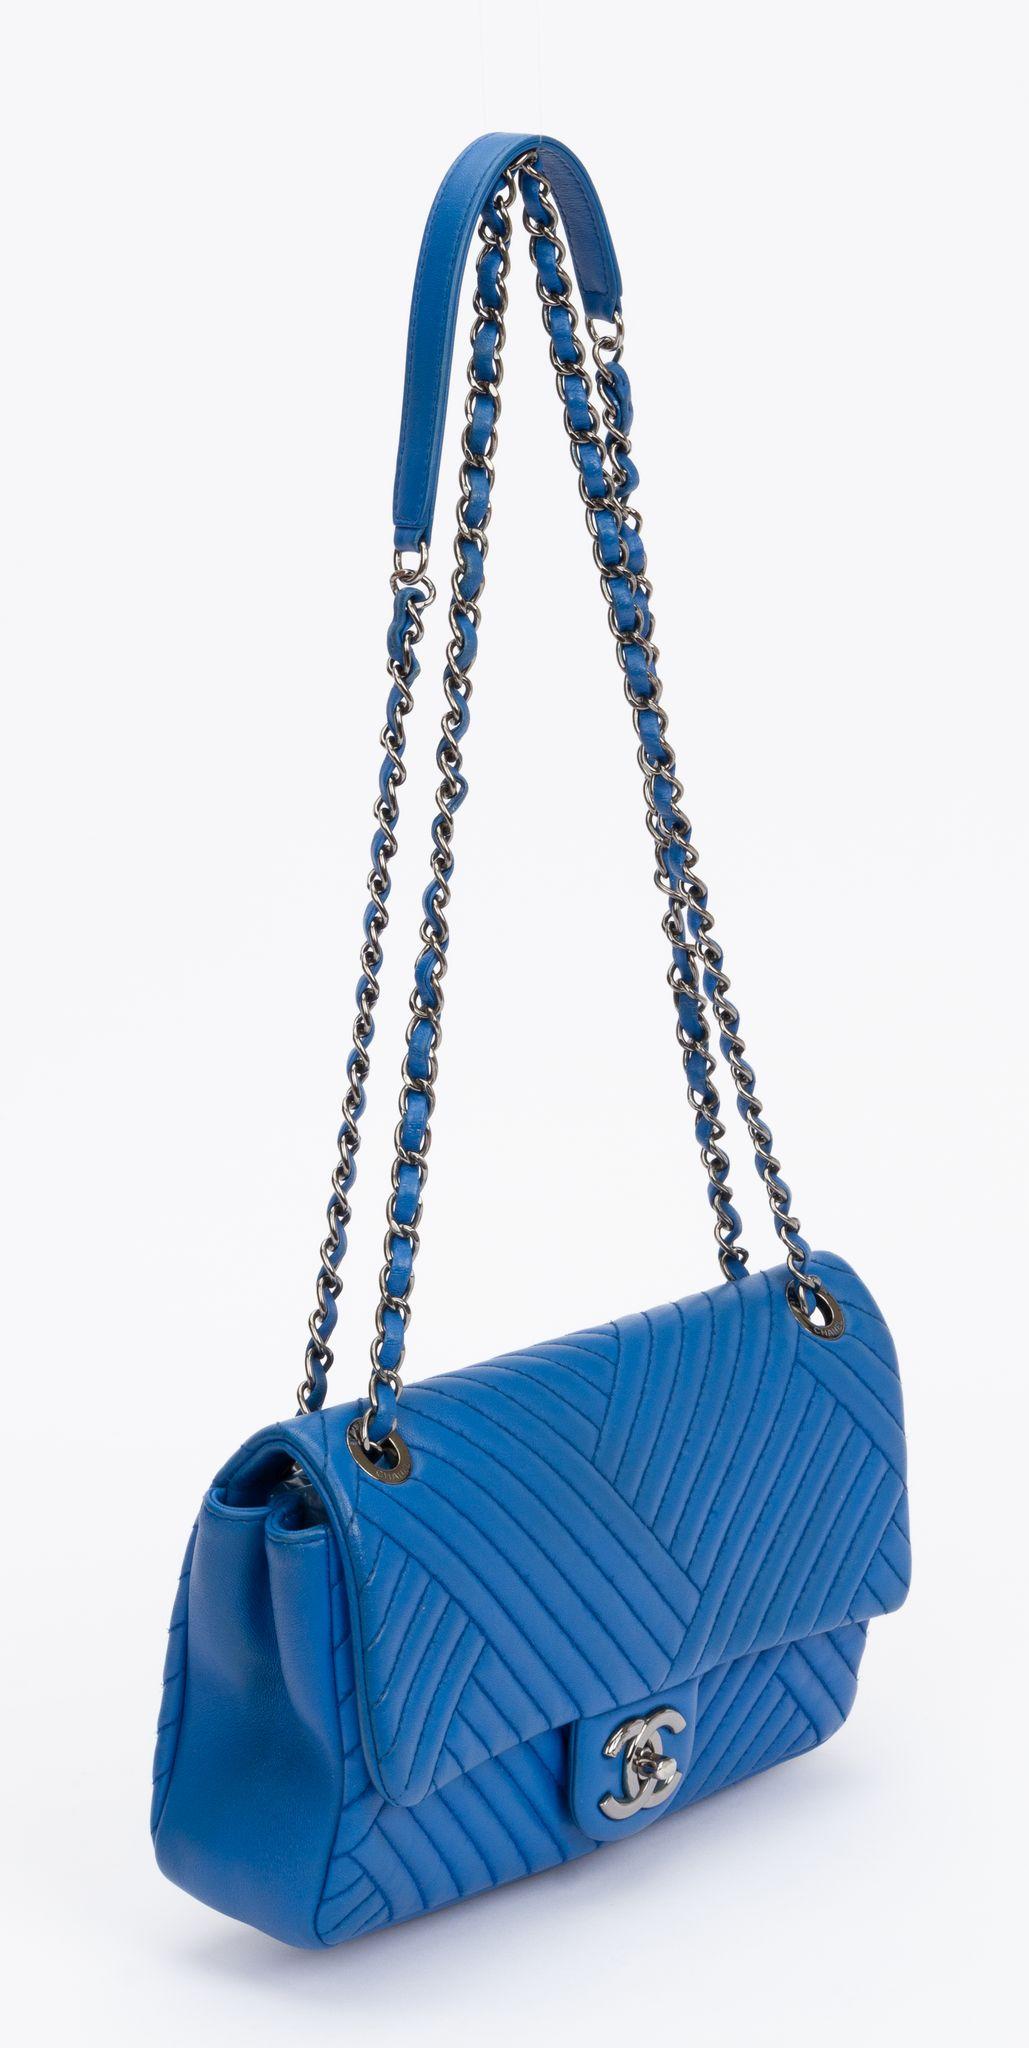 Chanel blue Izmir quilted leather single flap with silver tone hardware. Shoulder strap drop 13.5